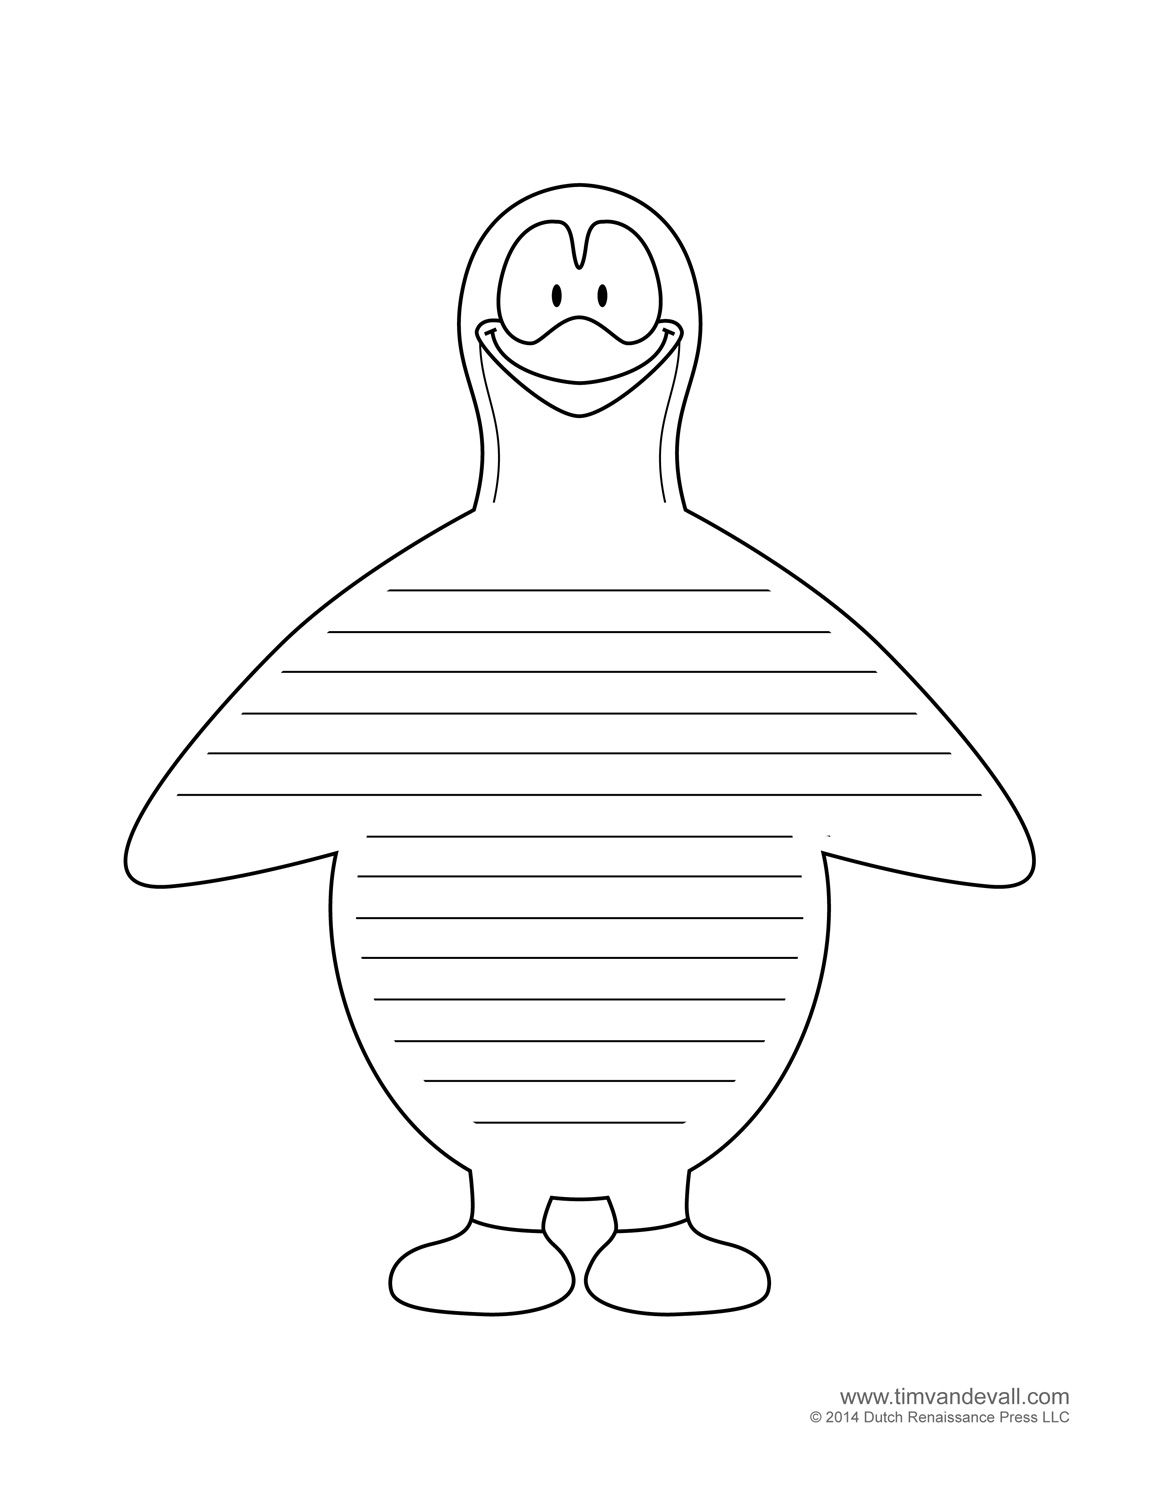 Penguin Template, Coloring Pages, Clipart Pictures And Crafts - Free Printable Penguin Template